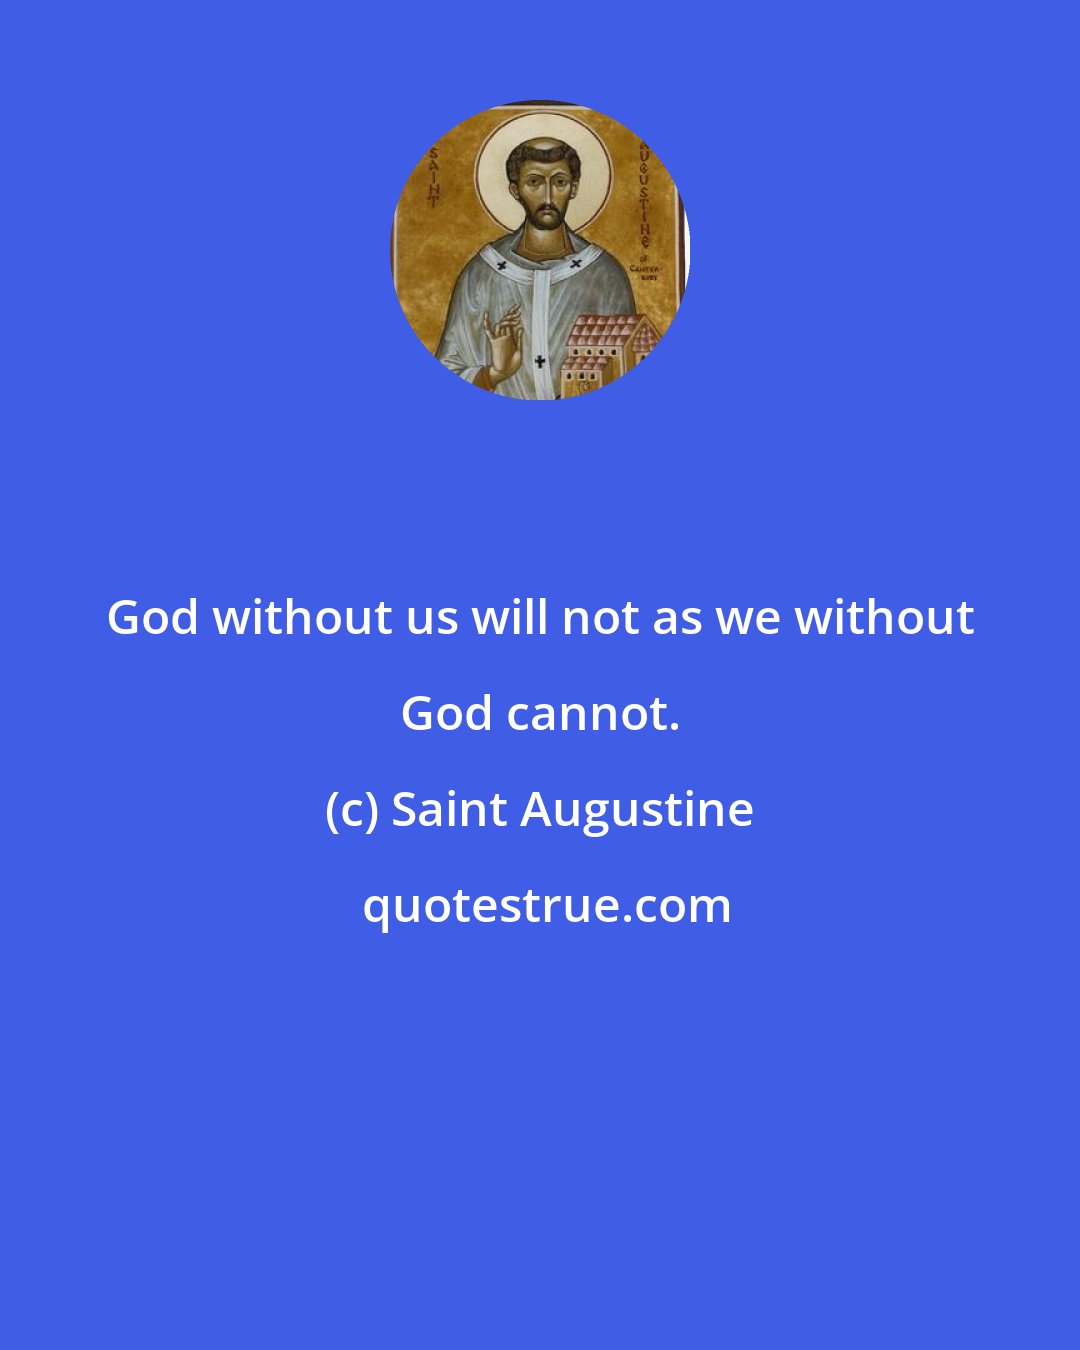 Saint Augustine: God without us will not as we without God cannot.